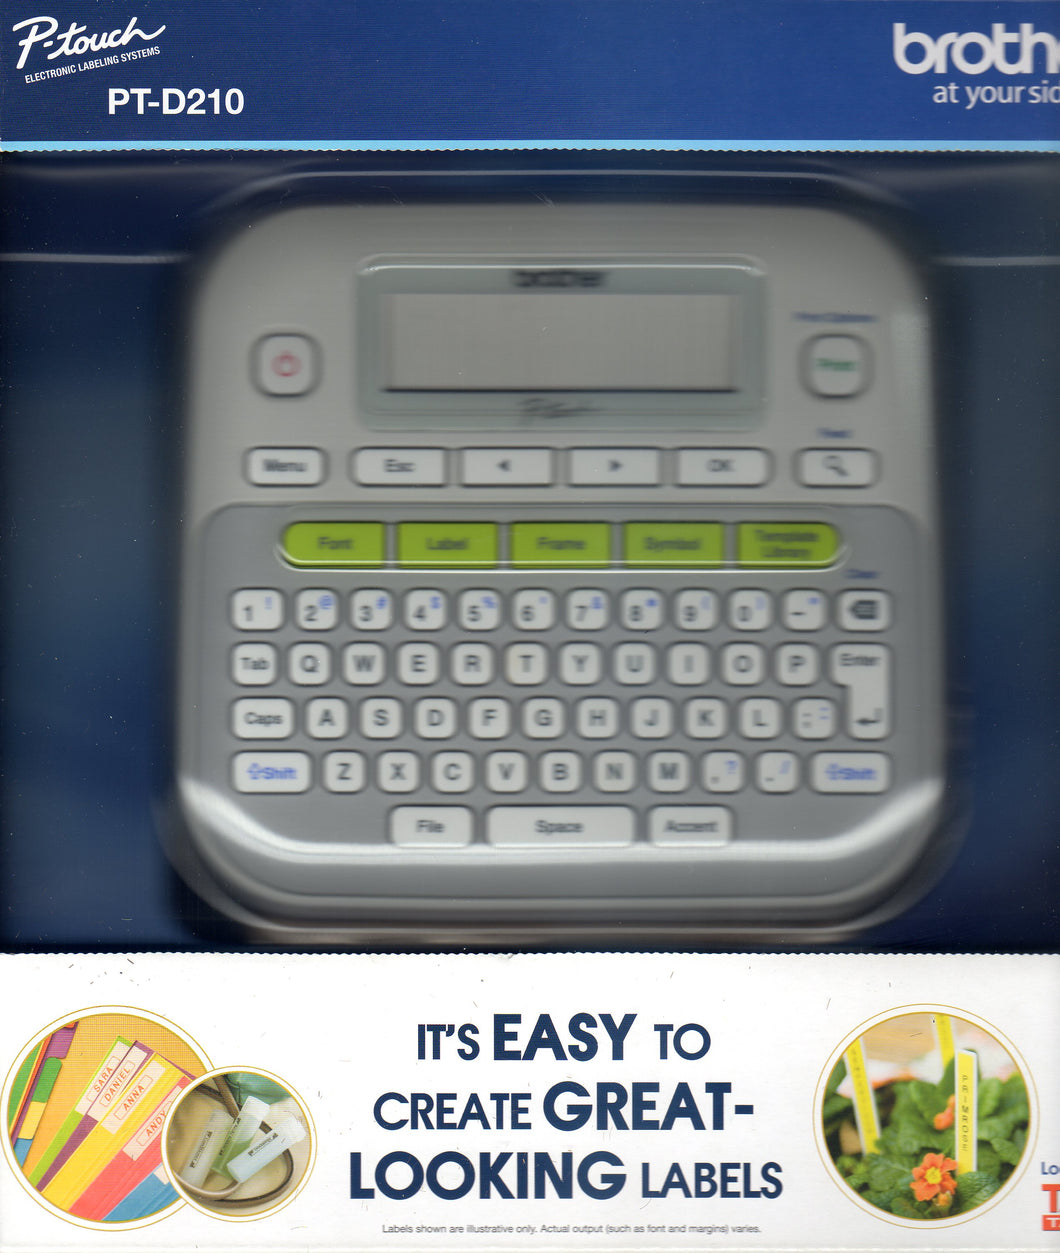 Brother P-touch, PTD210, New in box. Easy-to-Use Label Maker, One-Touch Keys, Multiple Font Styles, 27 User-Friendly Templates, White